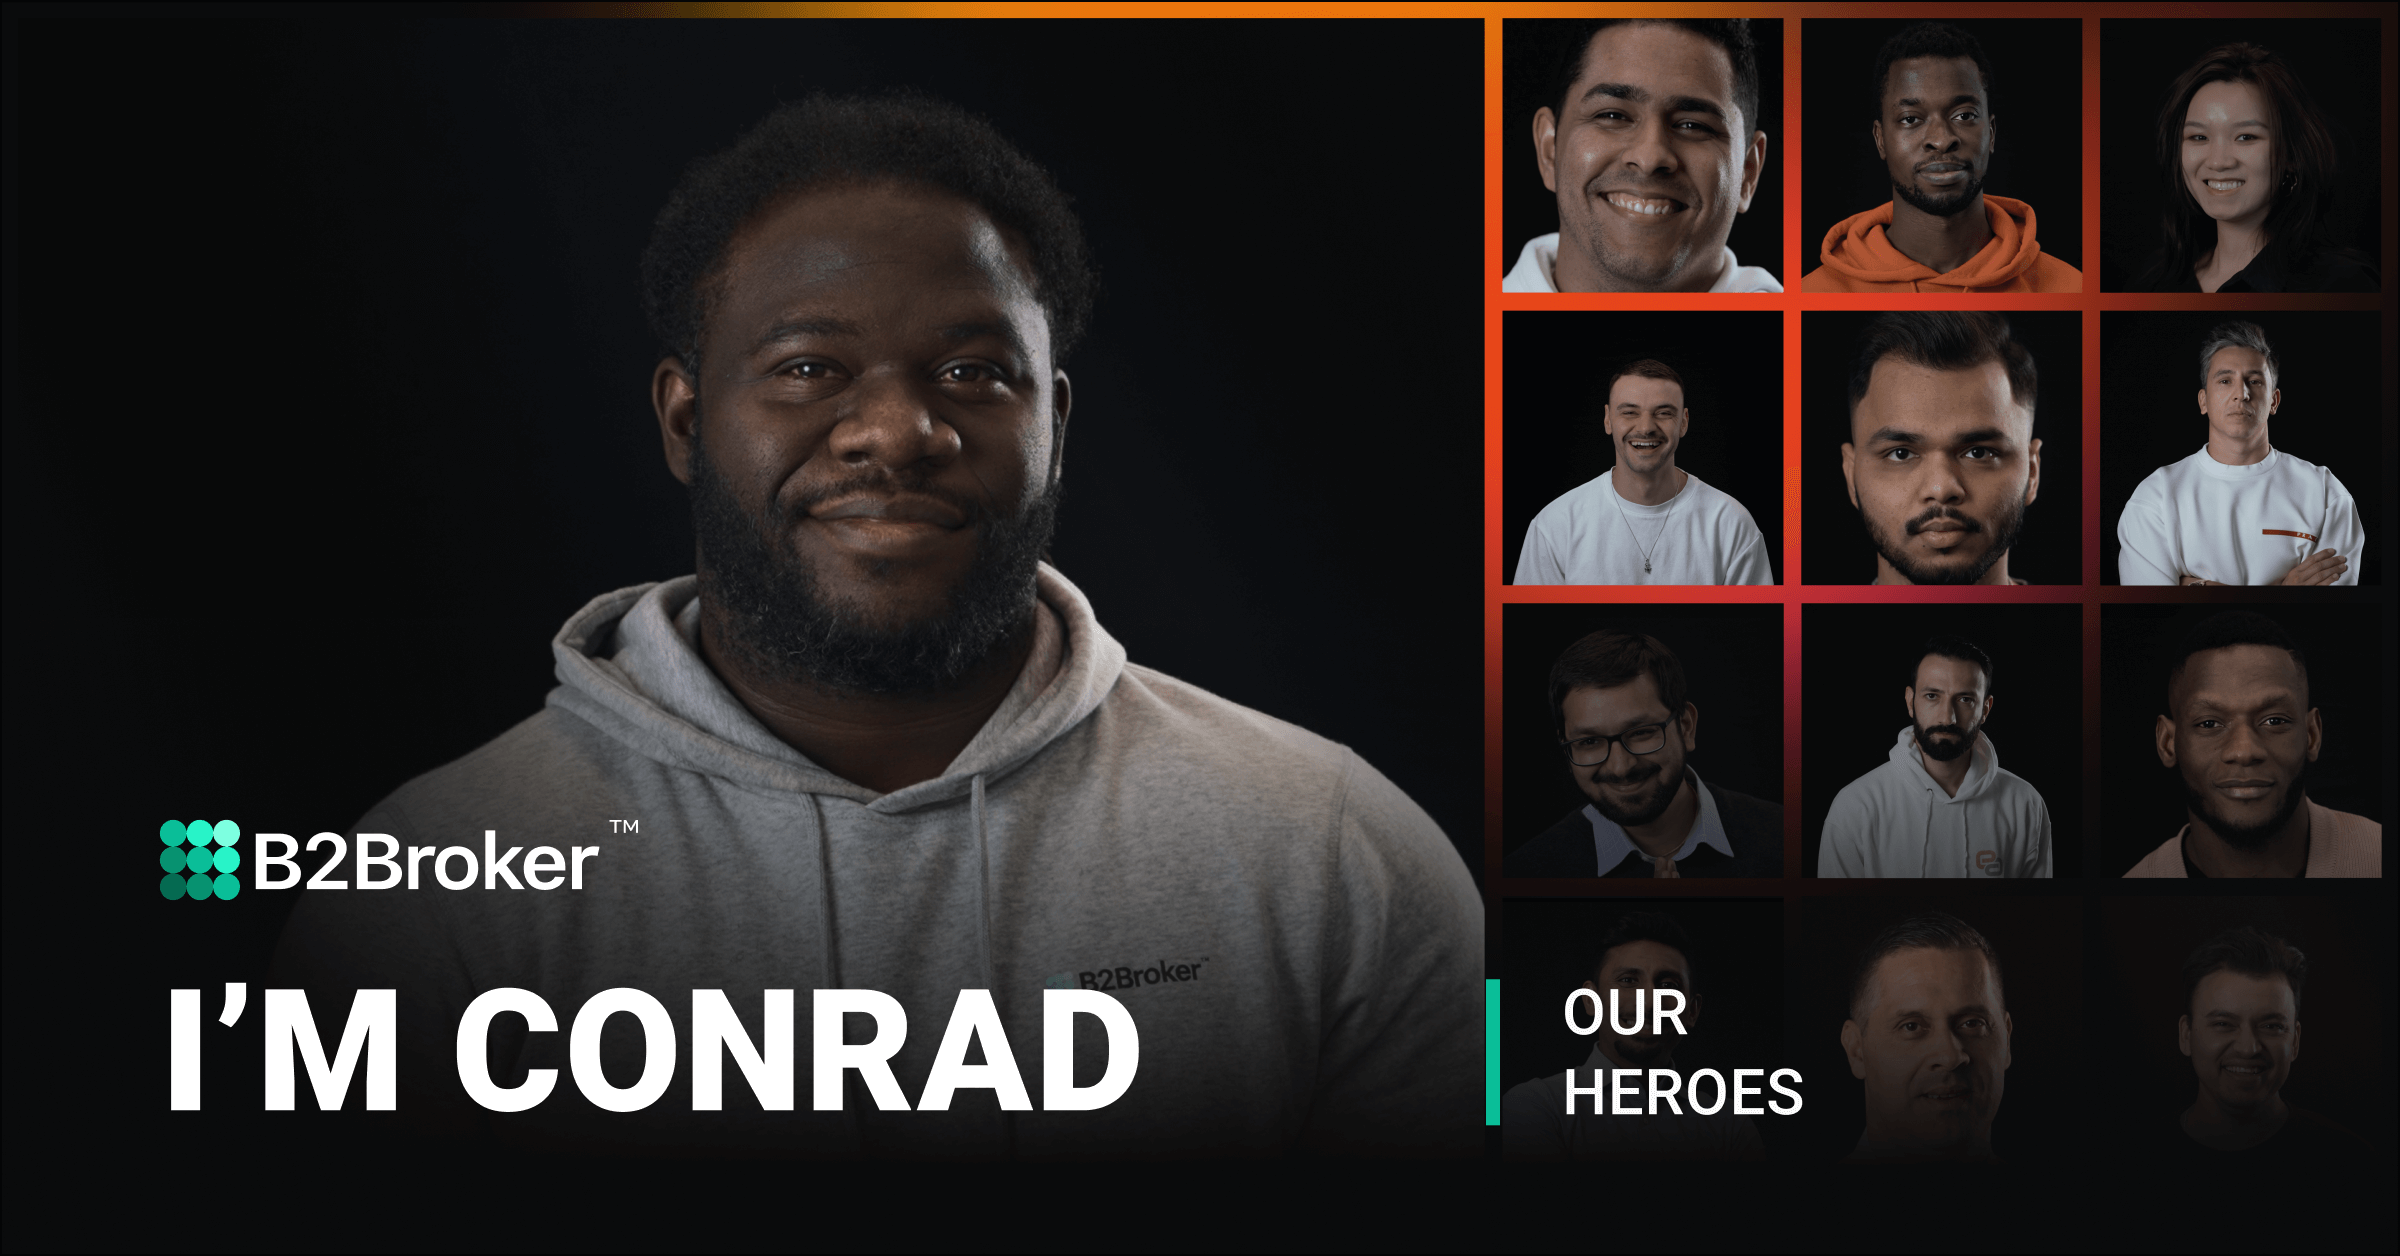 Our Heroes | Episode 3 | Meet Conrad: From Saint Vincent and the Grenadines With Love